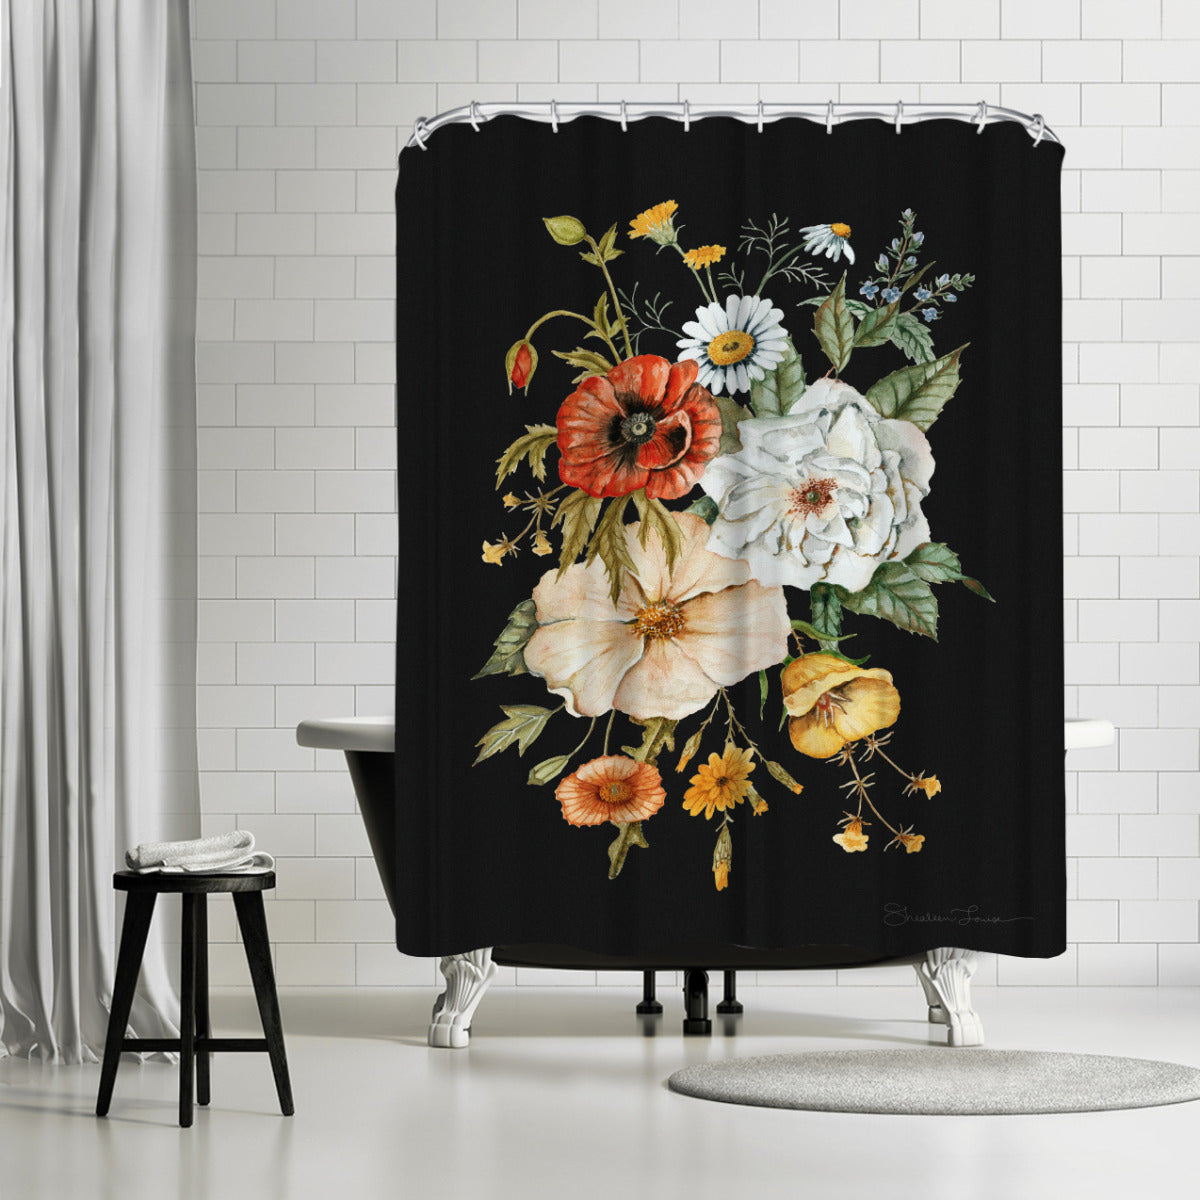 Wildflower Bouquet by Shealeen Louise Shower Curtain